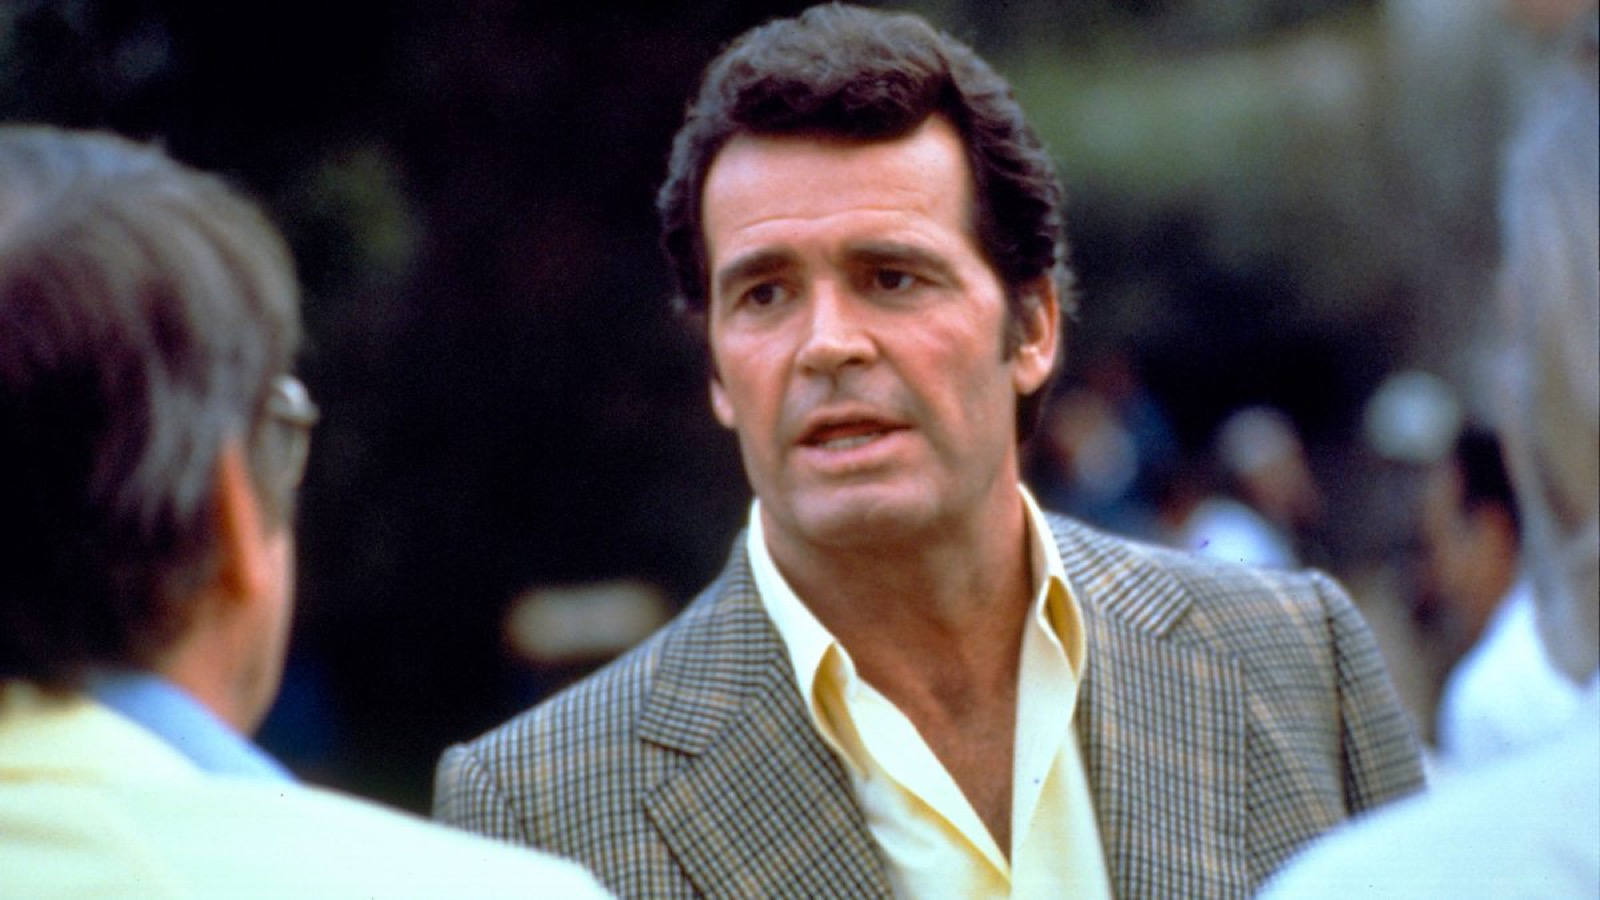 Classic TV Dads Quiz 👔: Match Them To Their Iconic Shows! Noah Beery, Jr. as Rocky Rockford on The Rockford Files